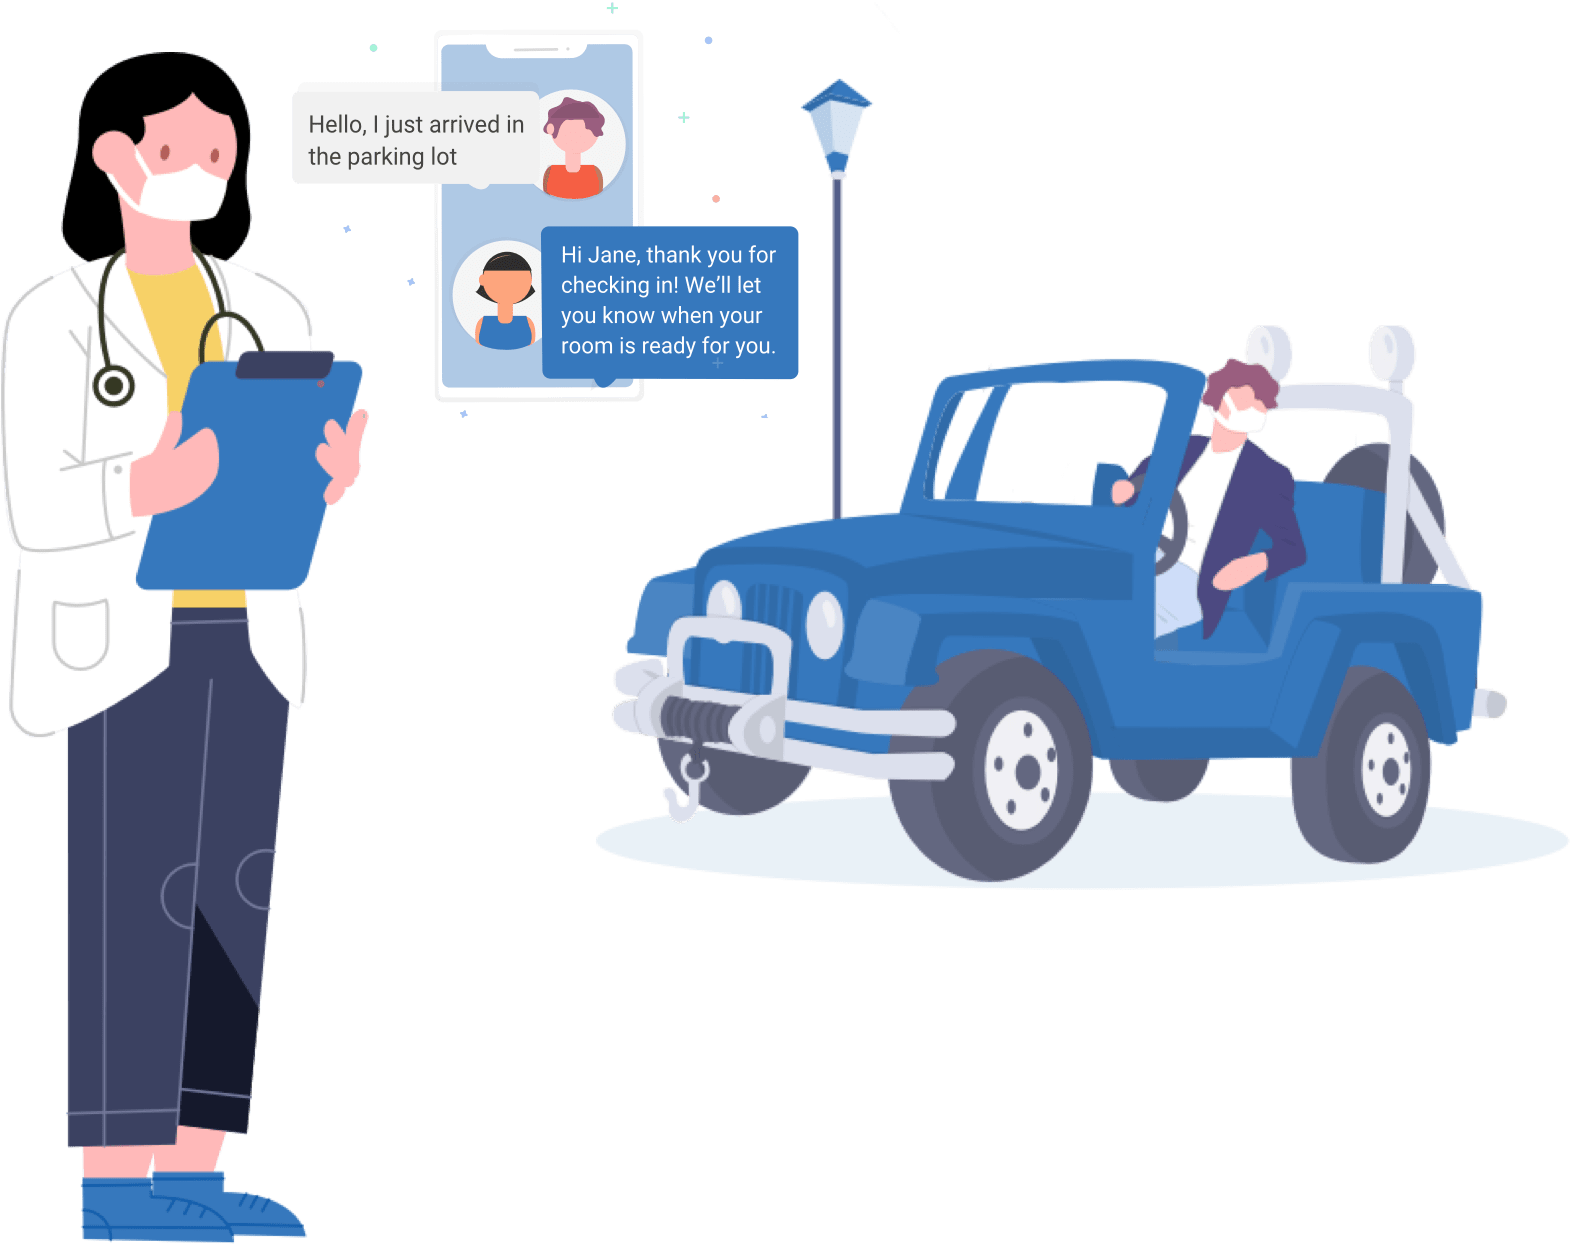 A depiction of Virtual Waiting Room Sign-up. The illustration visualizes how a patient can text a medical or dental practice once they have arrived in the parking lot. Also visualized is the automated response they receive from Doctible's Virtual Waiting Room Product containing further instructions.